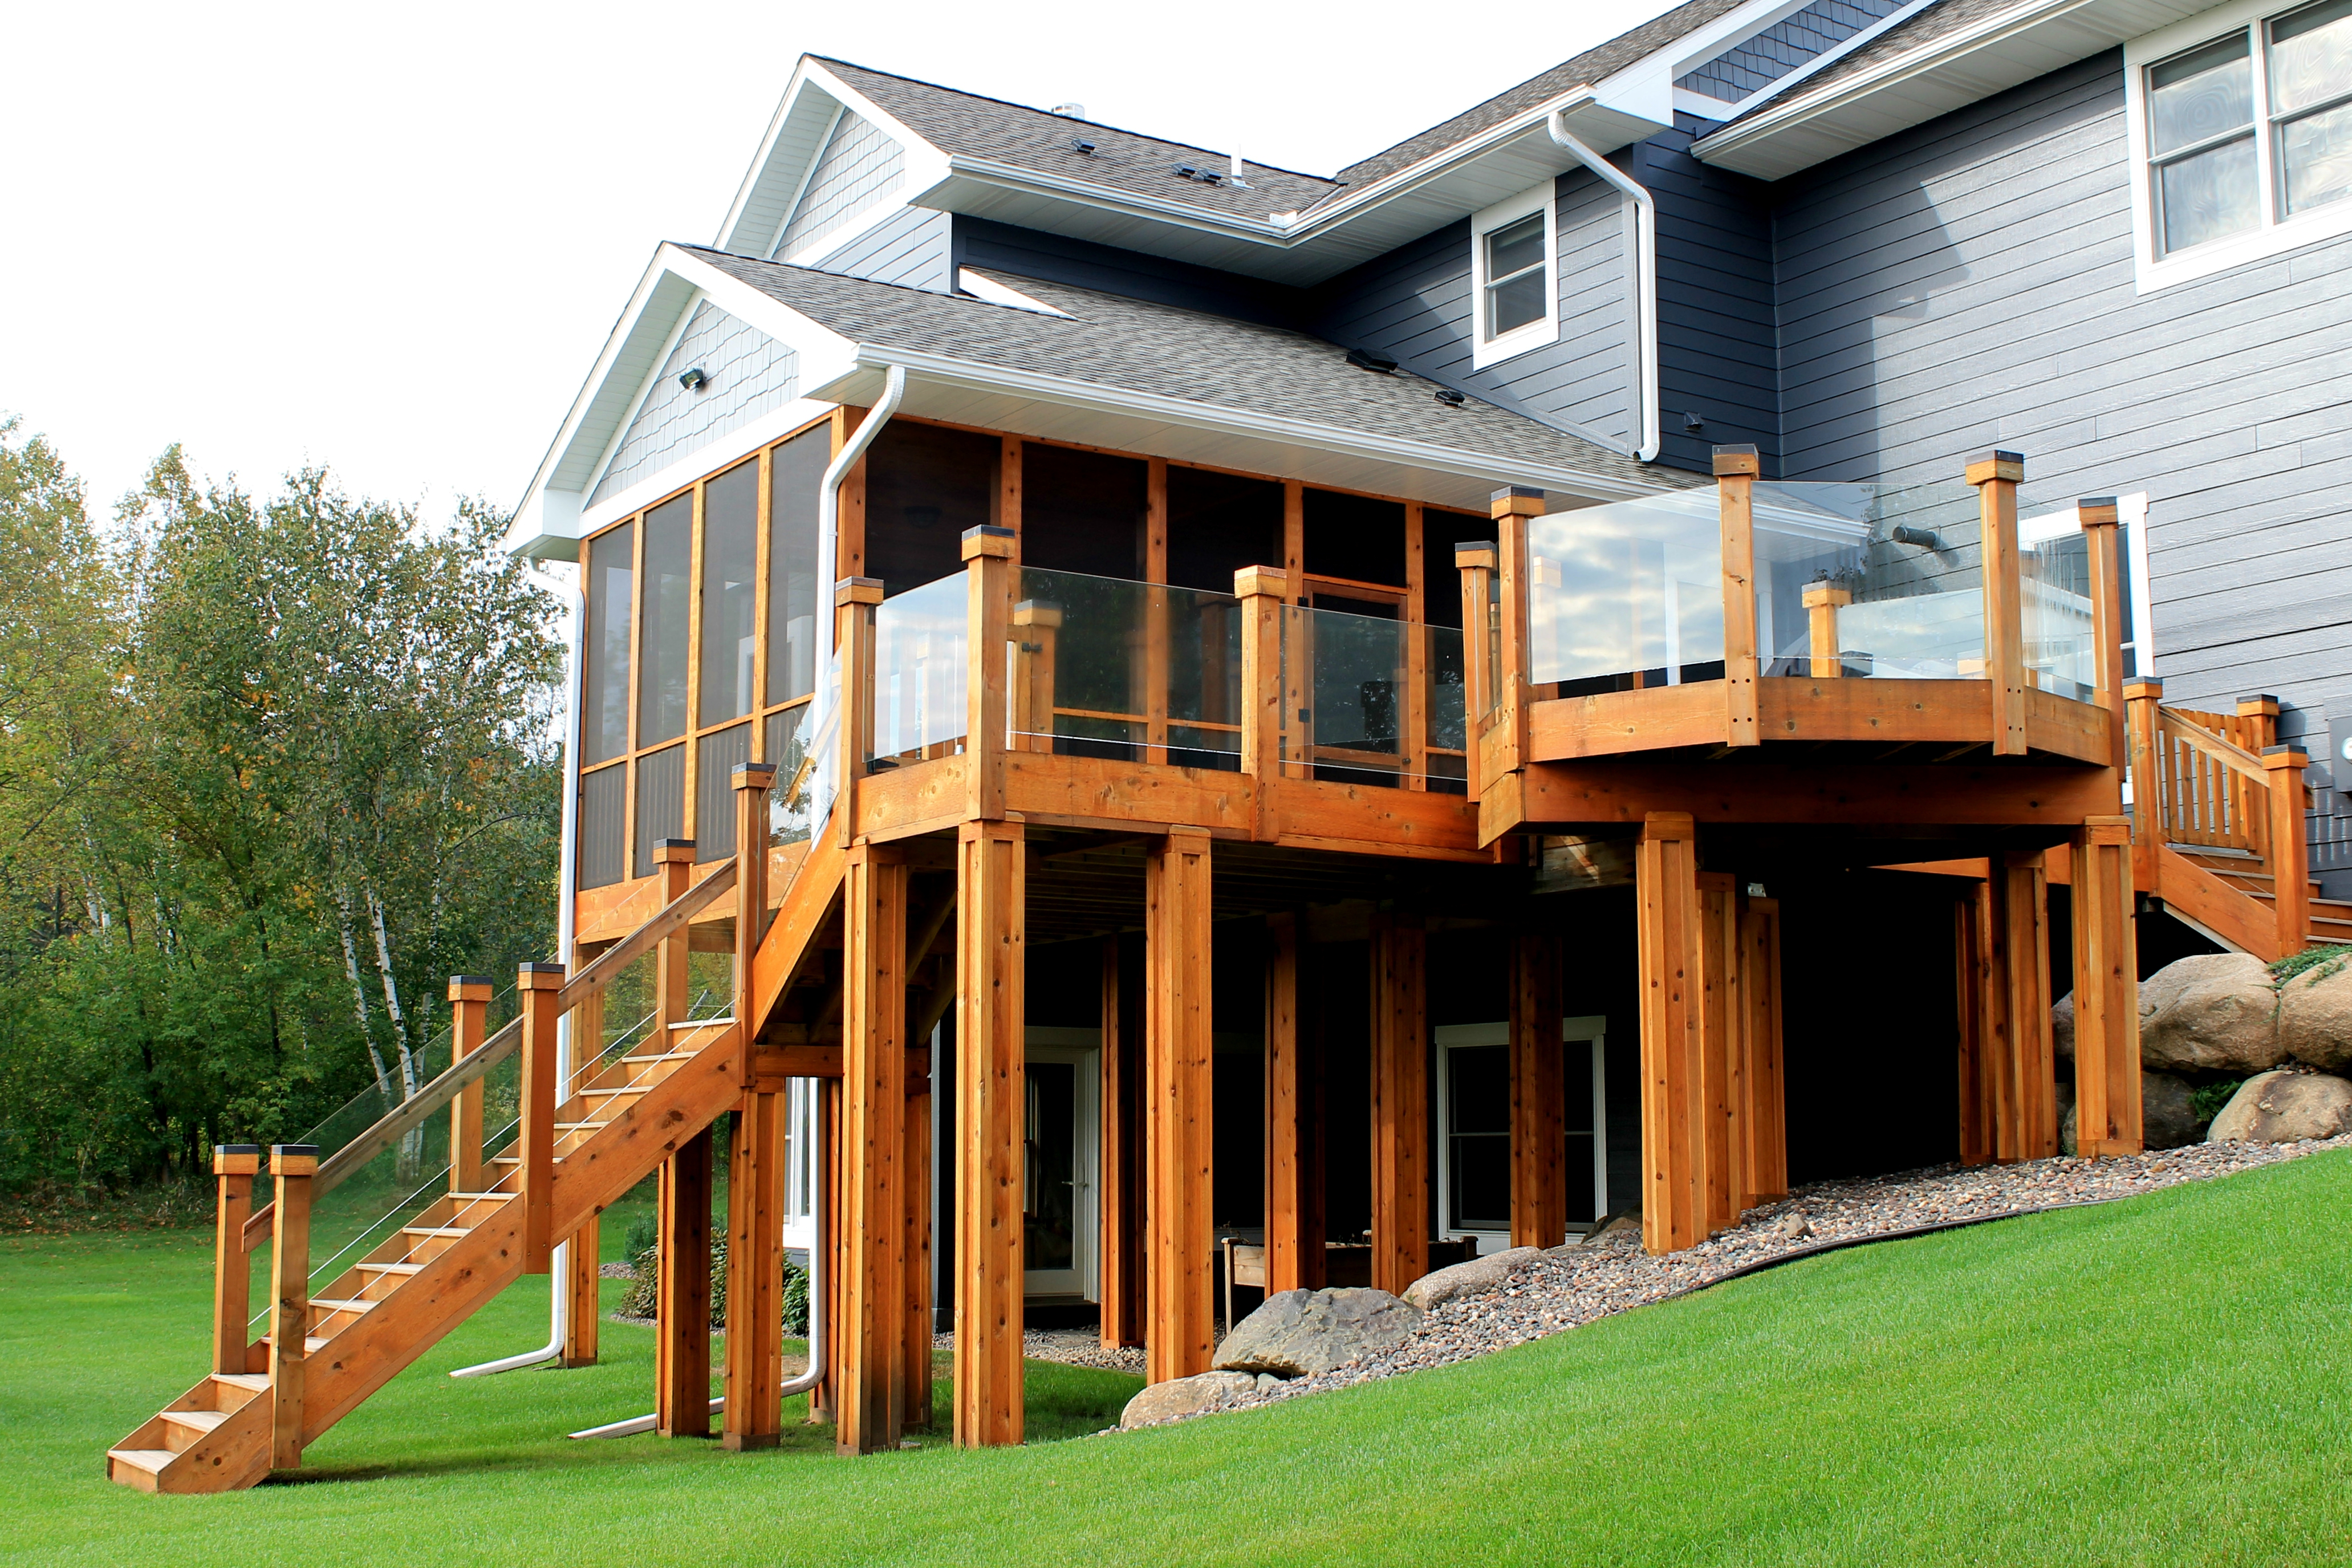 Deck and Screen porch addition, glass railing J.G. Hause Construction, Inc Oakdale (651)439-0189